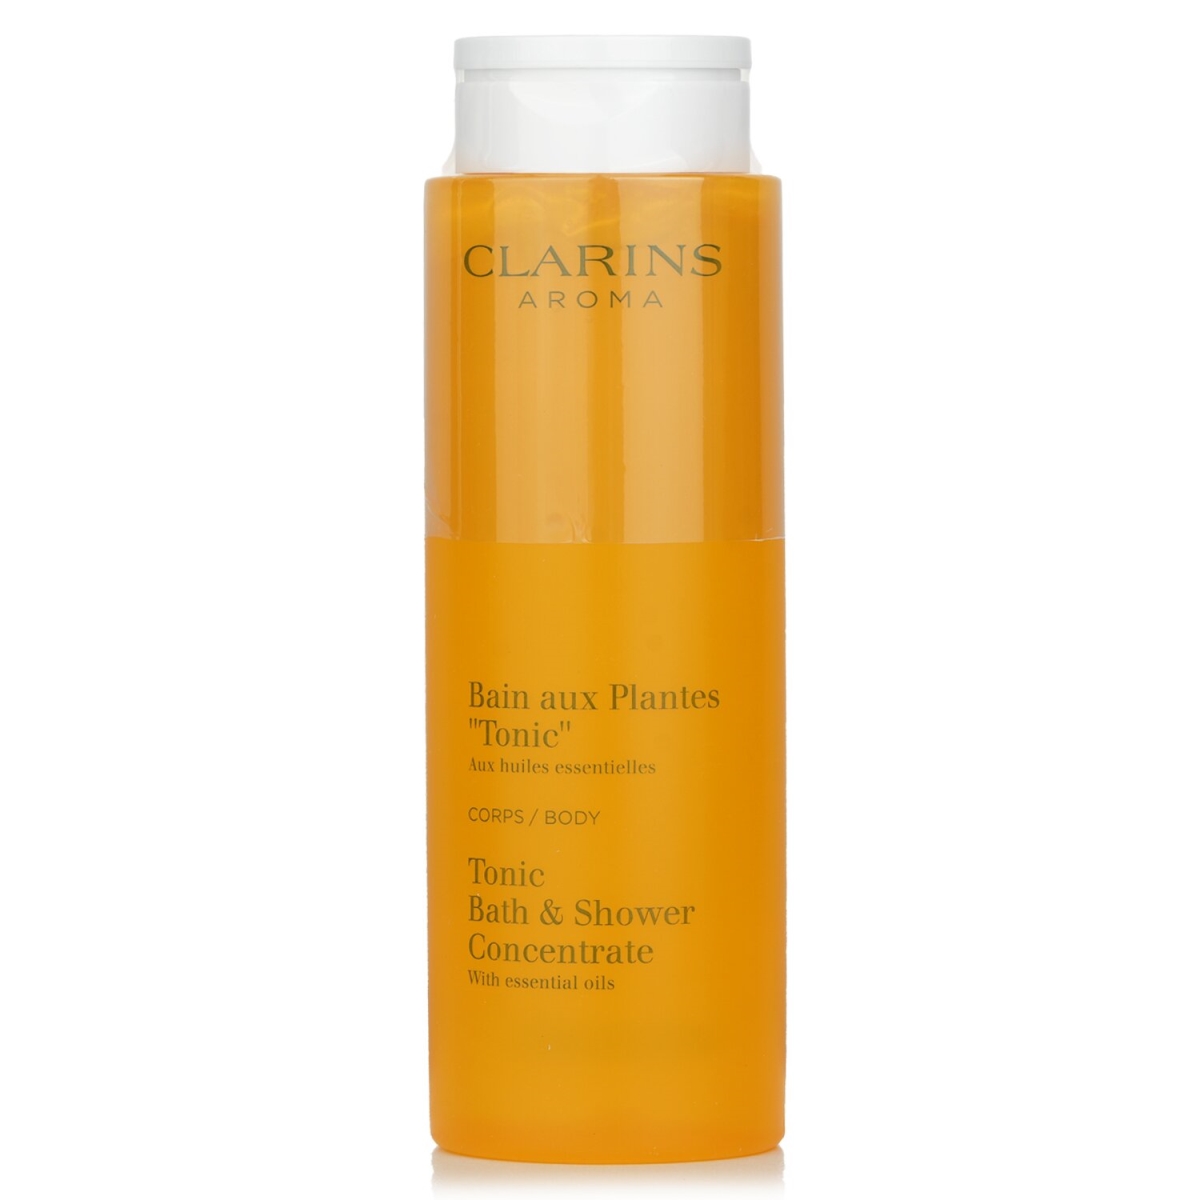 Clarins 303489 200 ml Bath & Shower Concentrate Tonic with Essential Oils